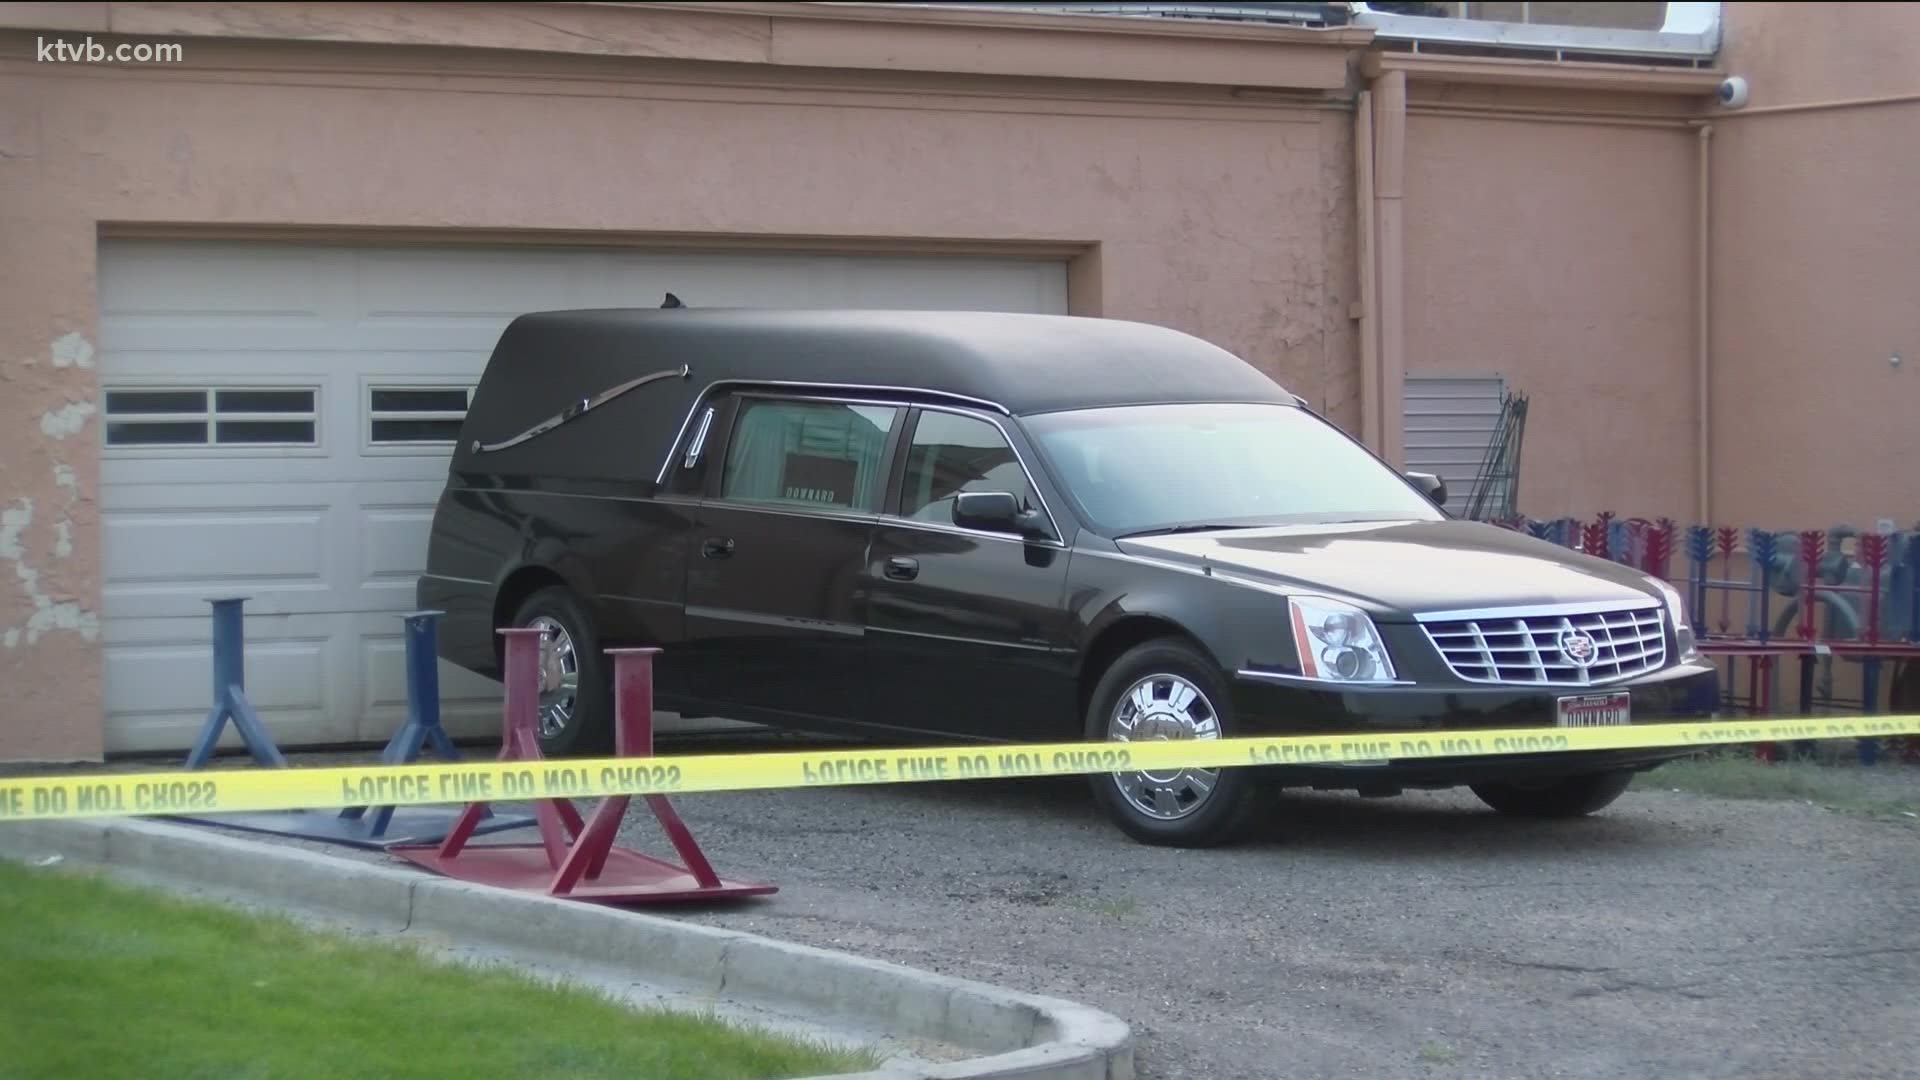 Authorities say 12 bodies and roughly 50 fetuses have been recovered from a funeral home in Pocatello.